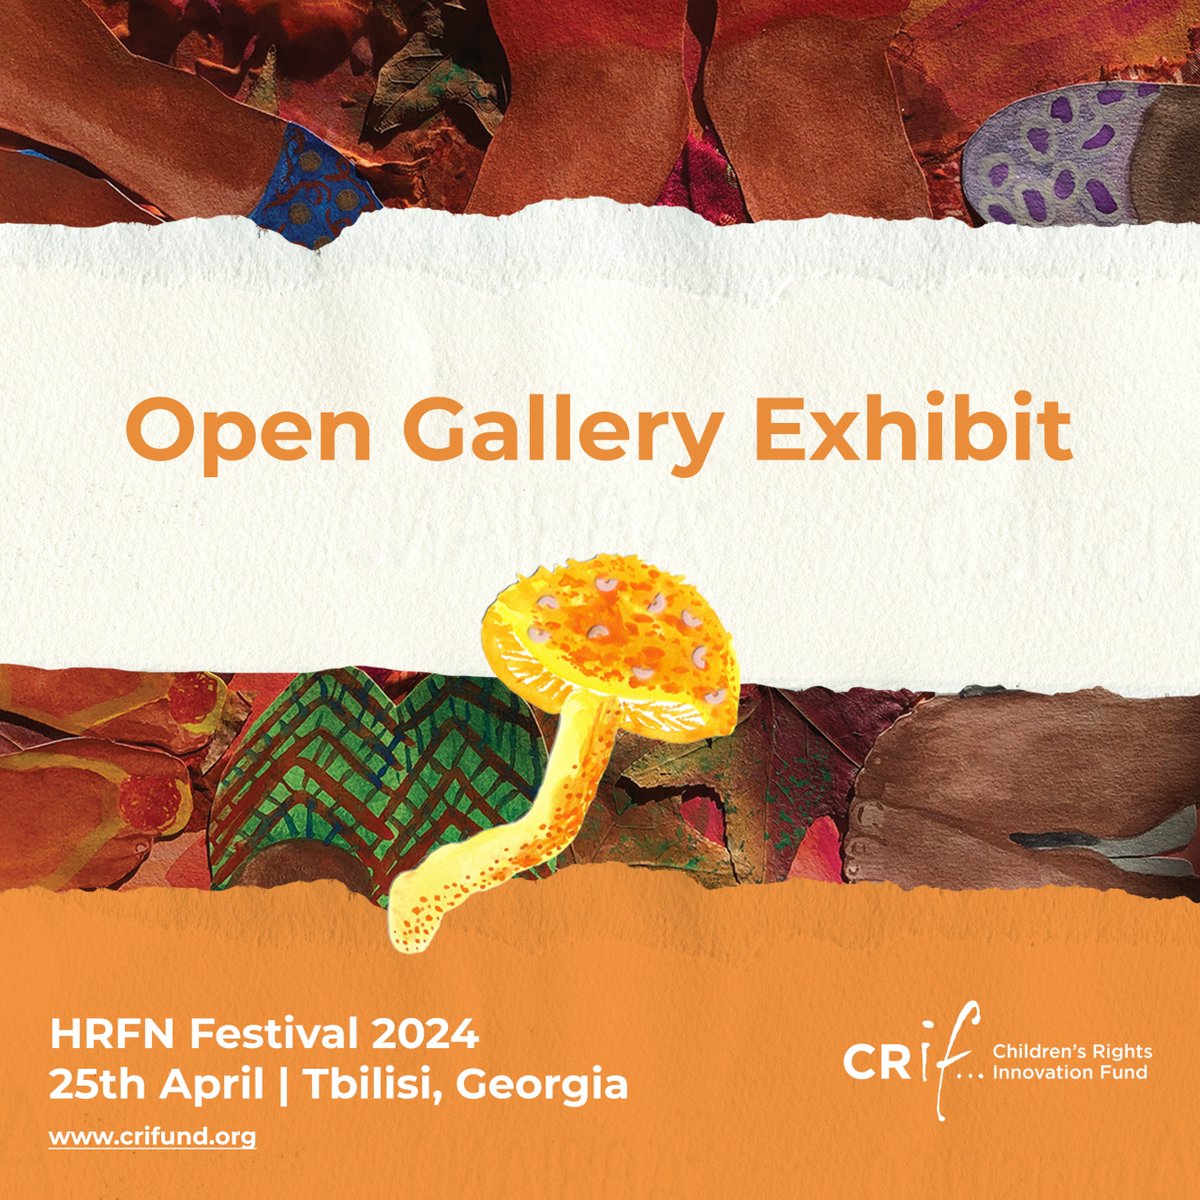 🥳Exciting update! #CRIF will be at this year’s #hrfn24 festival with an exclusive Open Gallery Space. Our exhibit will share learnings on philanthropy funding practices, and aim to trigger real-time dialogue for transformative change within the sector. More details coming up!